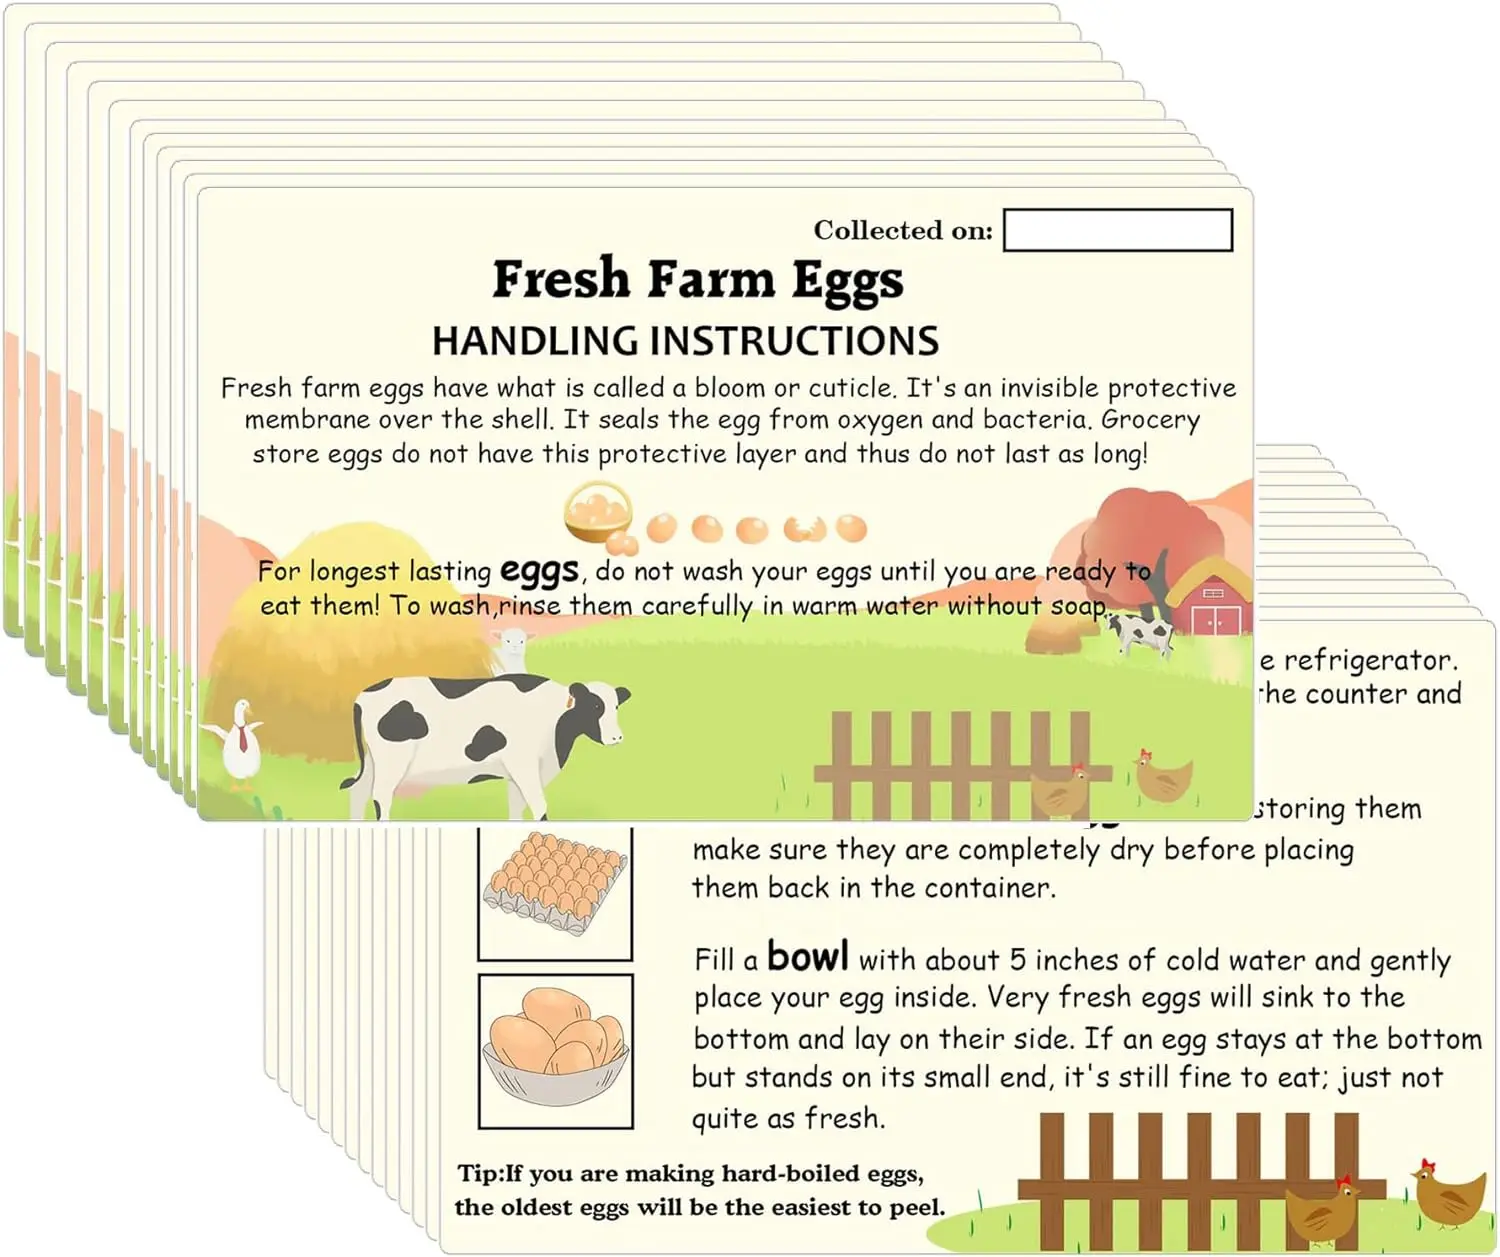 2*3.5Inch Farm Fresh Eggs Handling Instructions Care Accessories Cards Labels for Eggs Basket Storing Extra Organizer 50pcs 12pcs basket clip on labels small label clips basket clip erasable board type clip on label